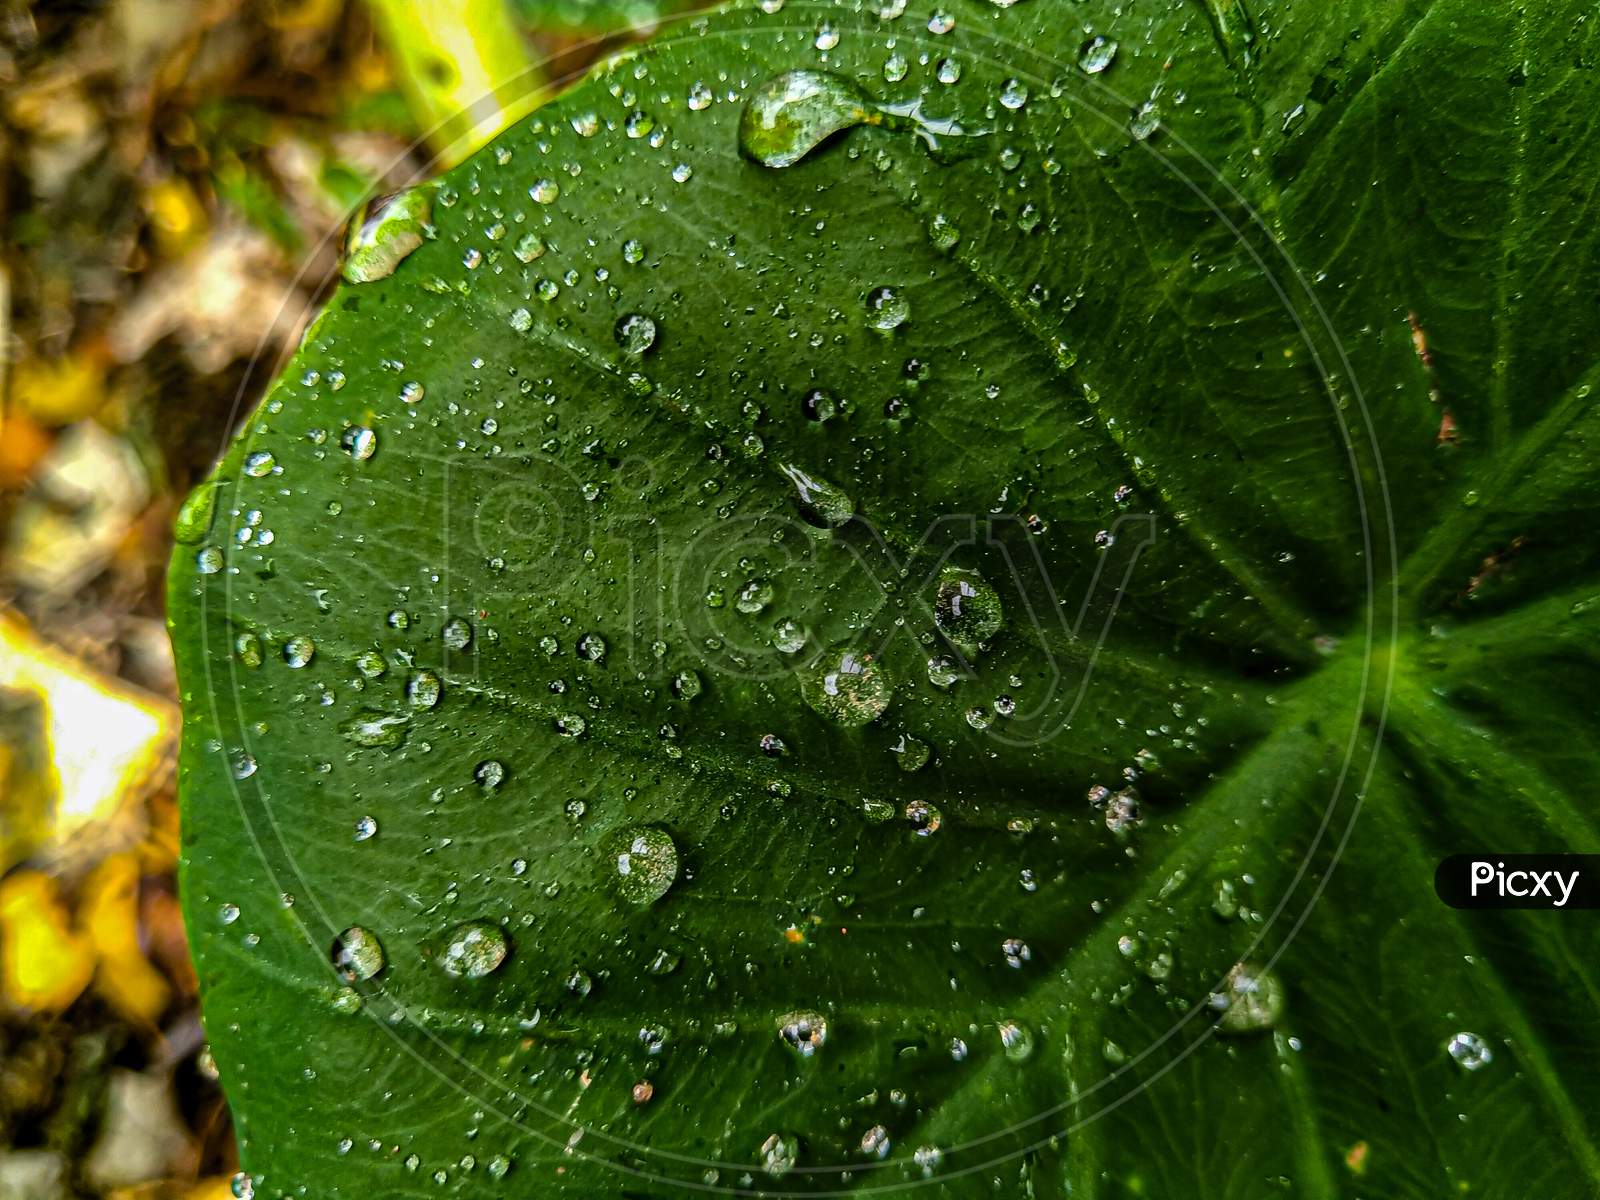 Water droplets on a green taro leaf.